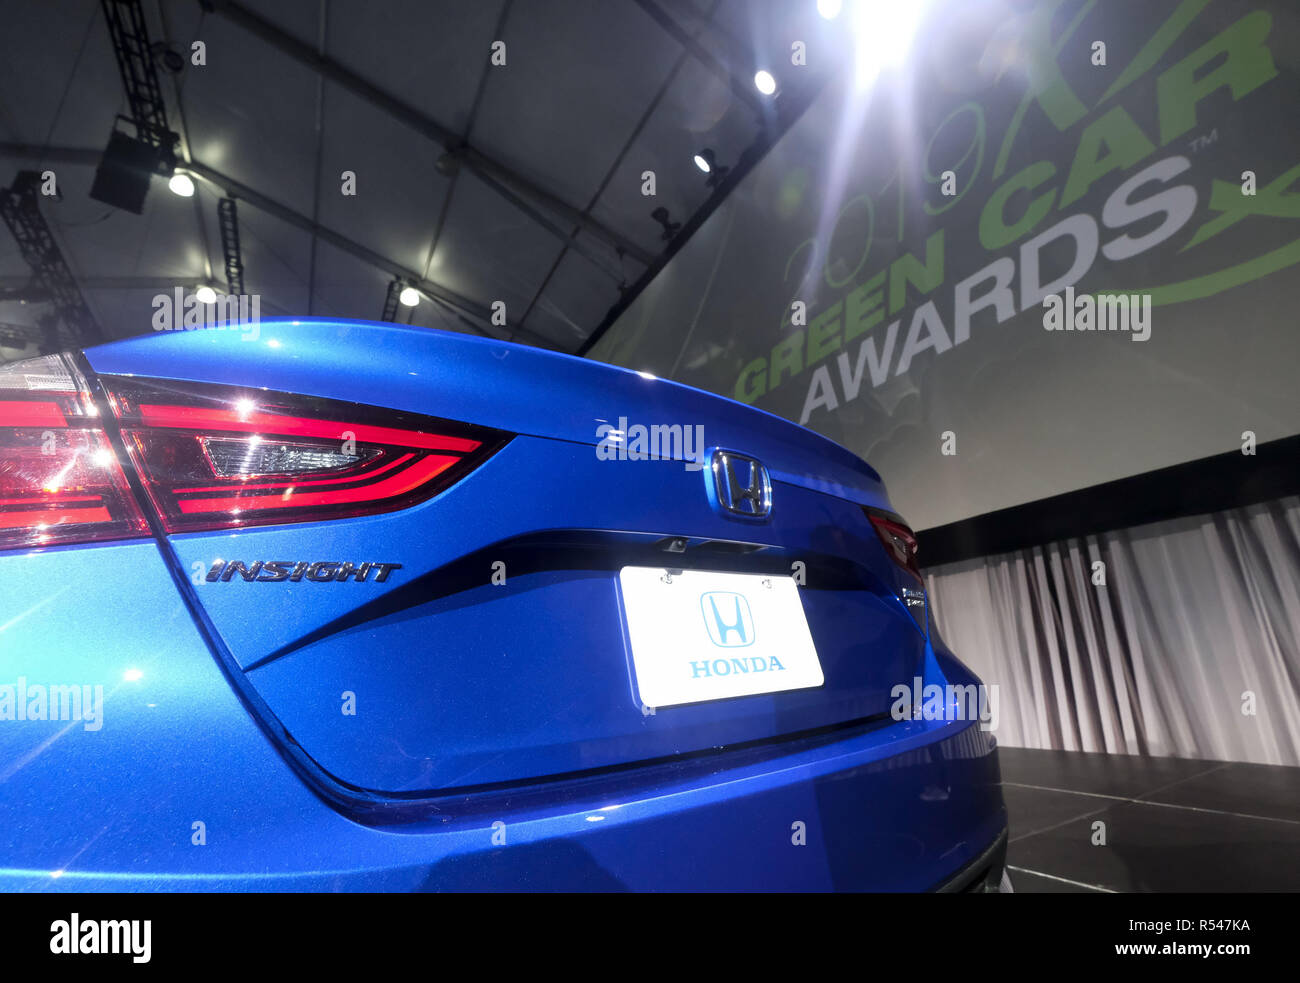 Los Angeles, California, USA. 29th Nov, 2018. The Honda Insight is unveiled after it was announced as the winner of the 2019 Green Car of the Year Award at the Los Angeles Auto Show, Thursday, Nov. 29, 2018, in Los Angeles. The Honda's third generation Insight hybrid sedan was named the winner of the 2019 Green Car of the Year Award. Credit: Ringo Chiu/ZUMA Wire/Alamy Live News Stock Photo